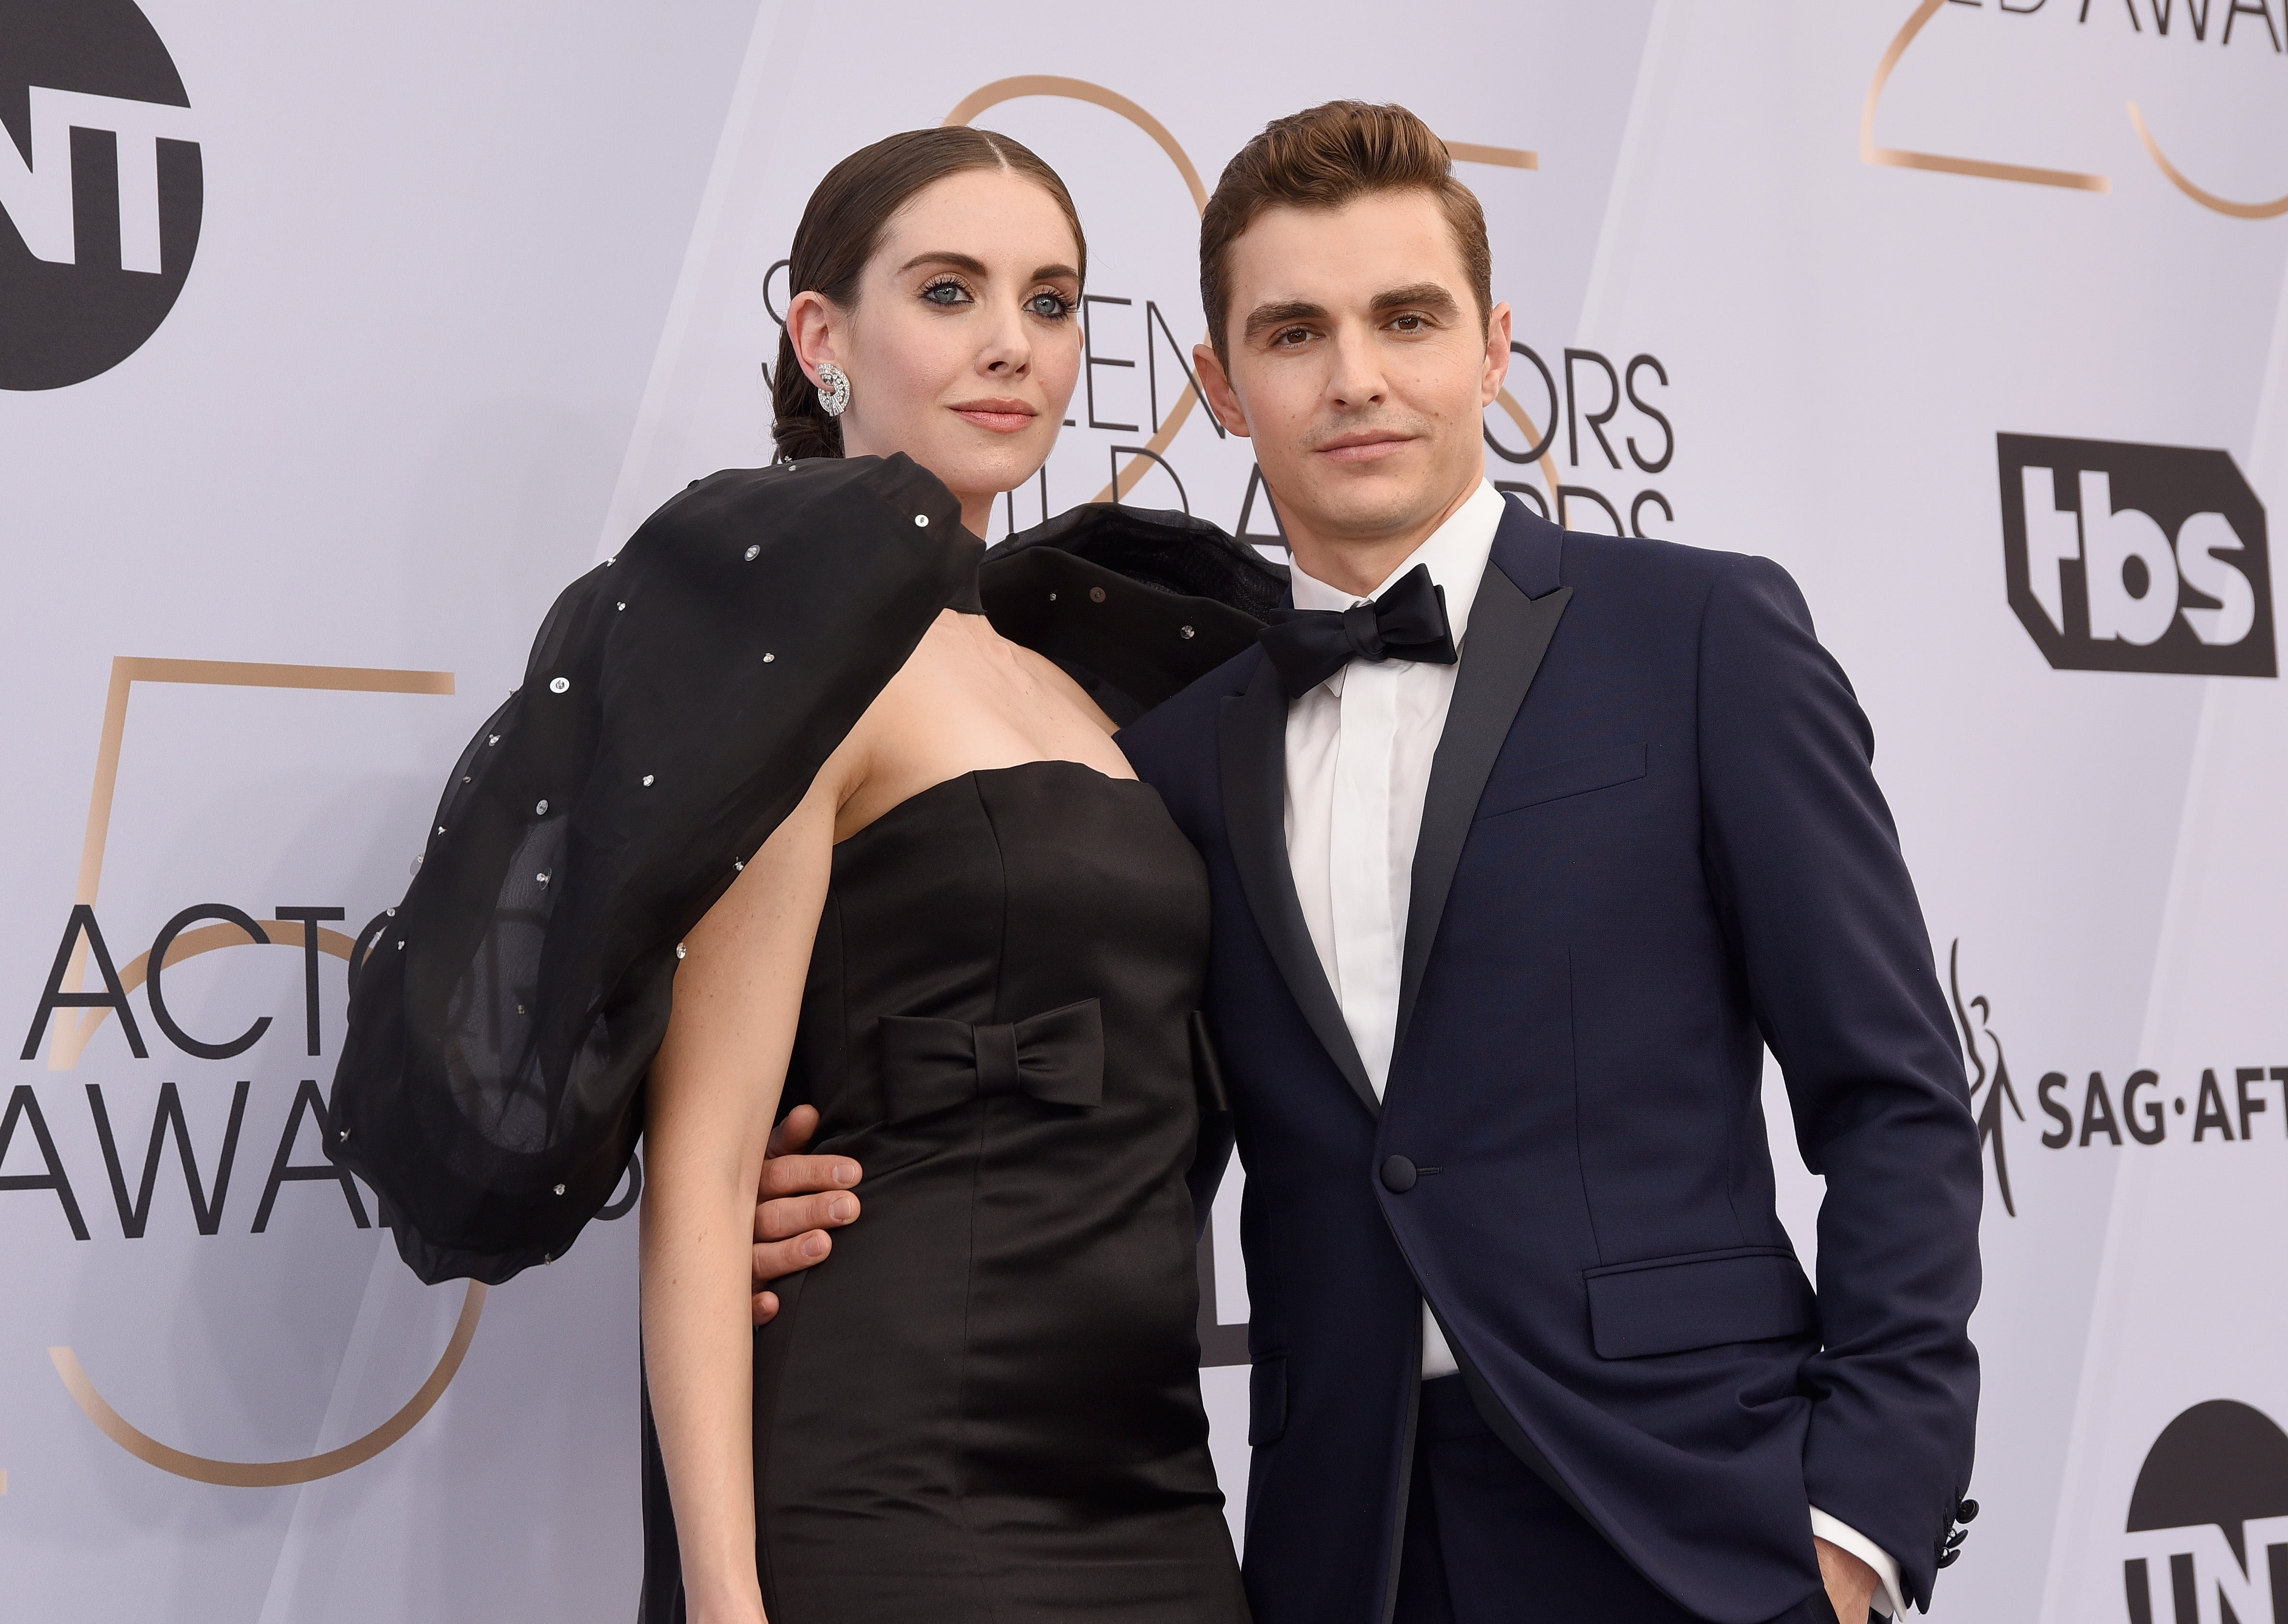 Alison Brie said her friend Jules bumped into Dave Franco at the airport and invited him over for dinner, where some ‘incredible matchmaking’ took place